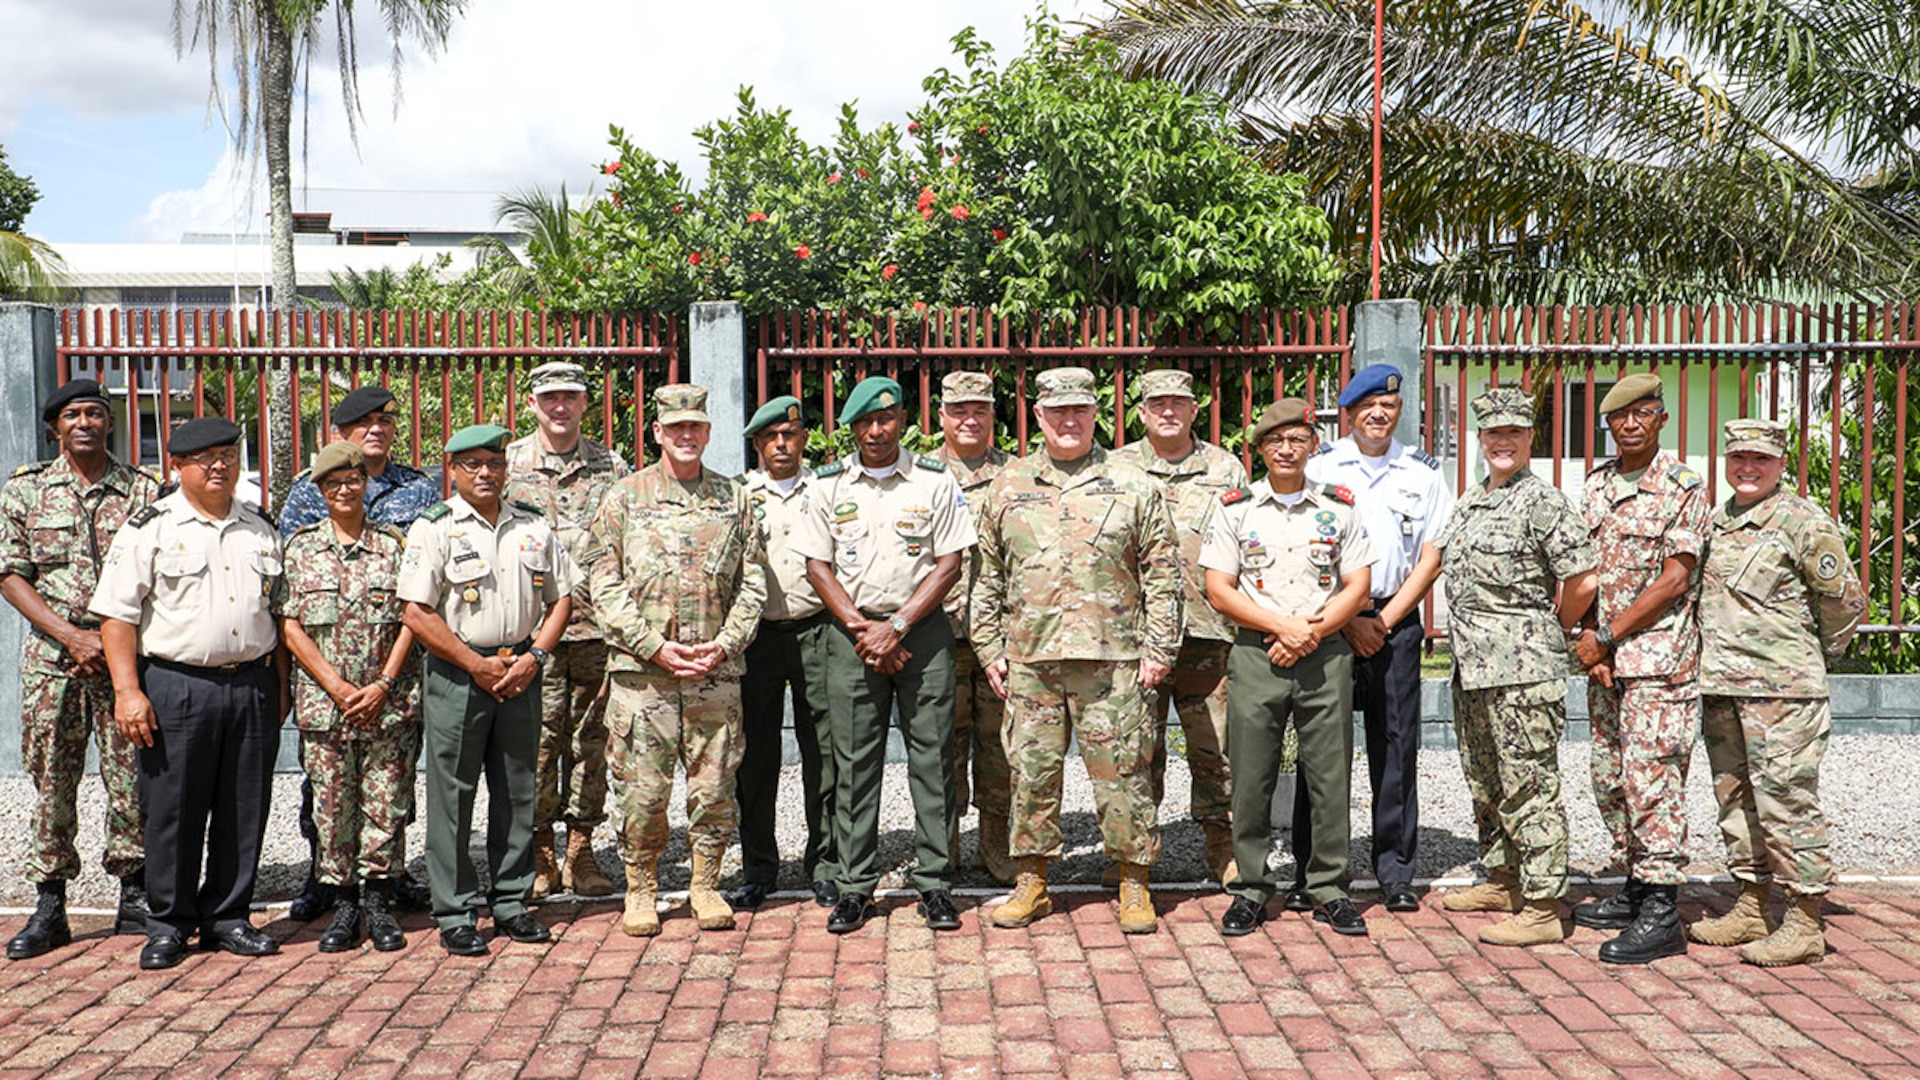 South Dakota National Guard and Suriname Defense
Force leaders stand together during a distinguished leaders visit to Paramaribo, Suriname, Nov. 24, 2021.